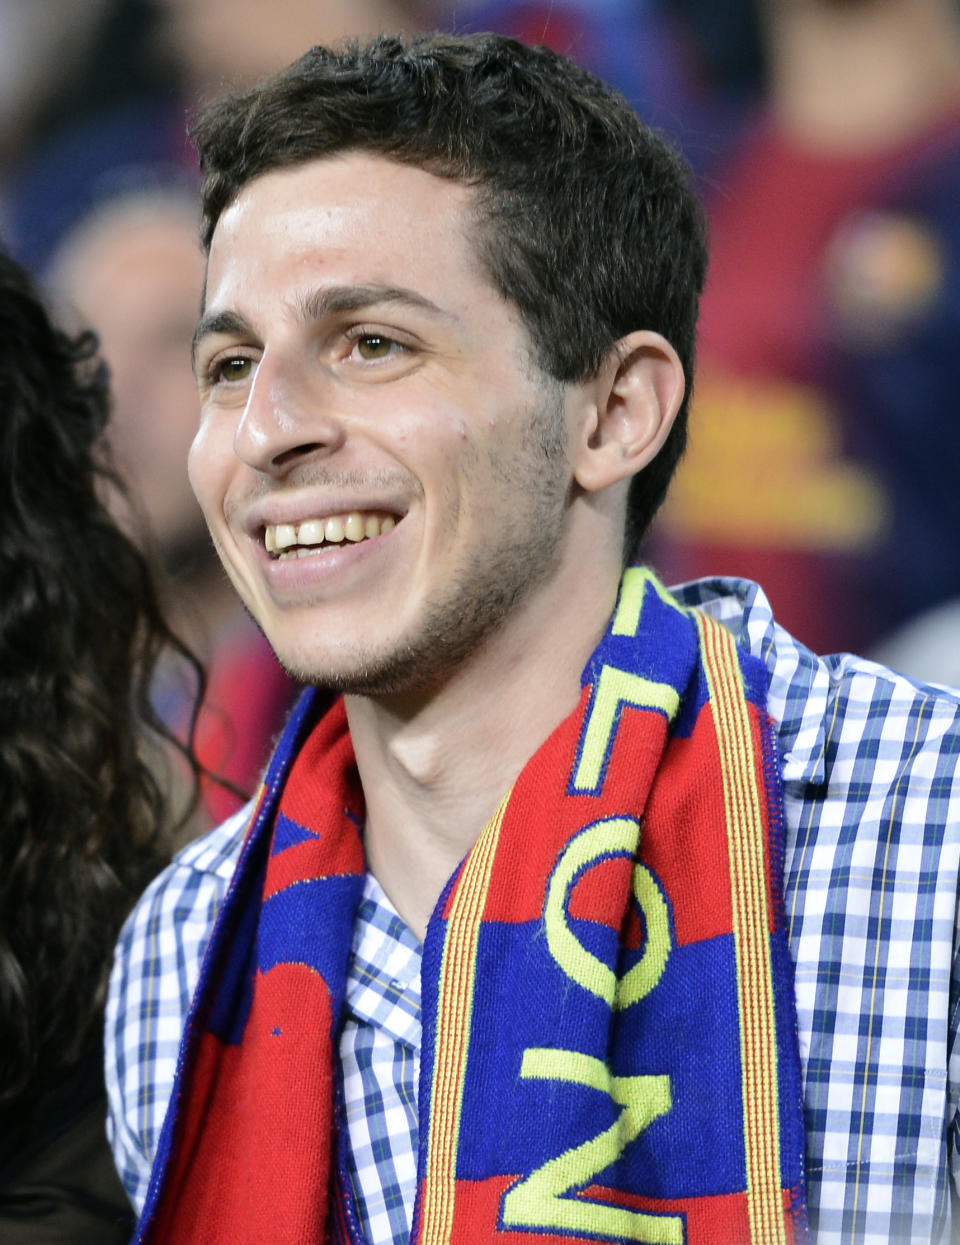 FILE - Israeli soldier Gilad Shalit, right, smiles during a Spanish La Liga soccer match between FC Barcelona and Real Madrid at the Camp Nou stadium in Barcelona, Spain, Oct. 7, 2012. Hamas' 2006 seizure of Shalit consumed Israeli society for years — a national obsession that prompted Israel to heavily bombard the Gaza Strip and ultimately release over 1,000 Palestinian prisoners, many of whom had been convicted of deadly attacks on Israelis, in exchange for Shalit’s freedom. This time, Gaza’s Hamas rulers have abducted dozens of Israeli civilians and soldiers as part of a multipronged, shock attack. (AP Photo/Manu Fernandez, File)